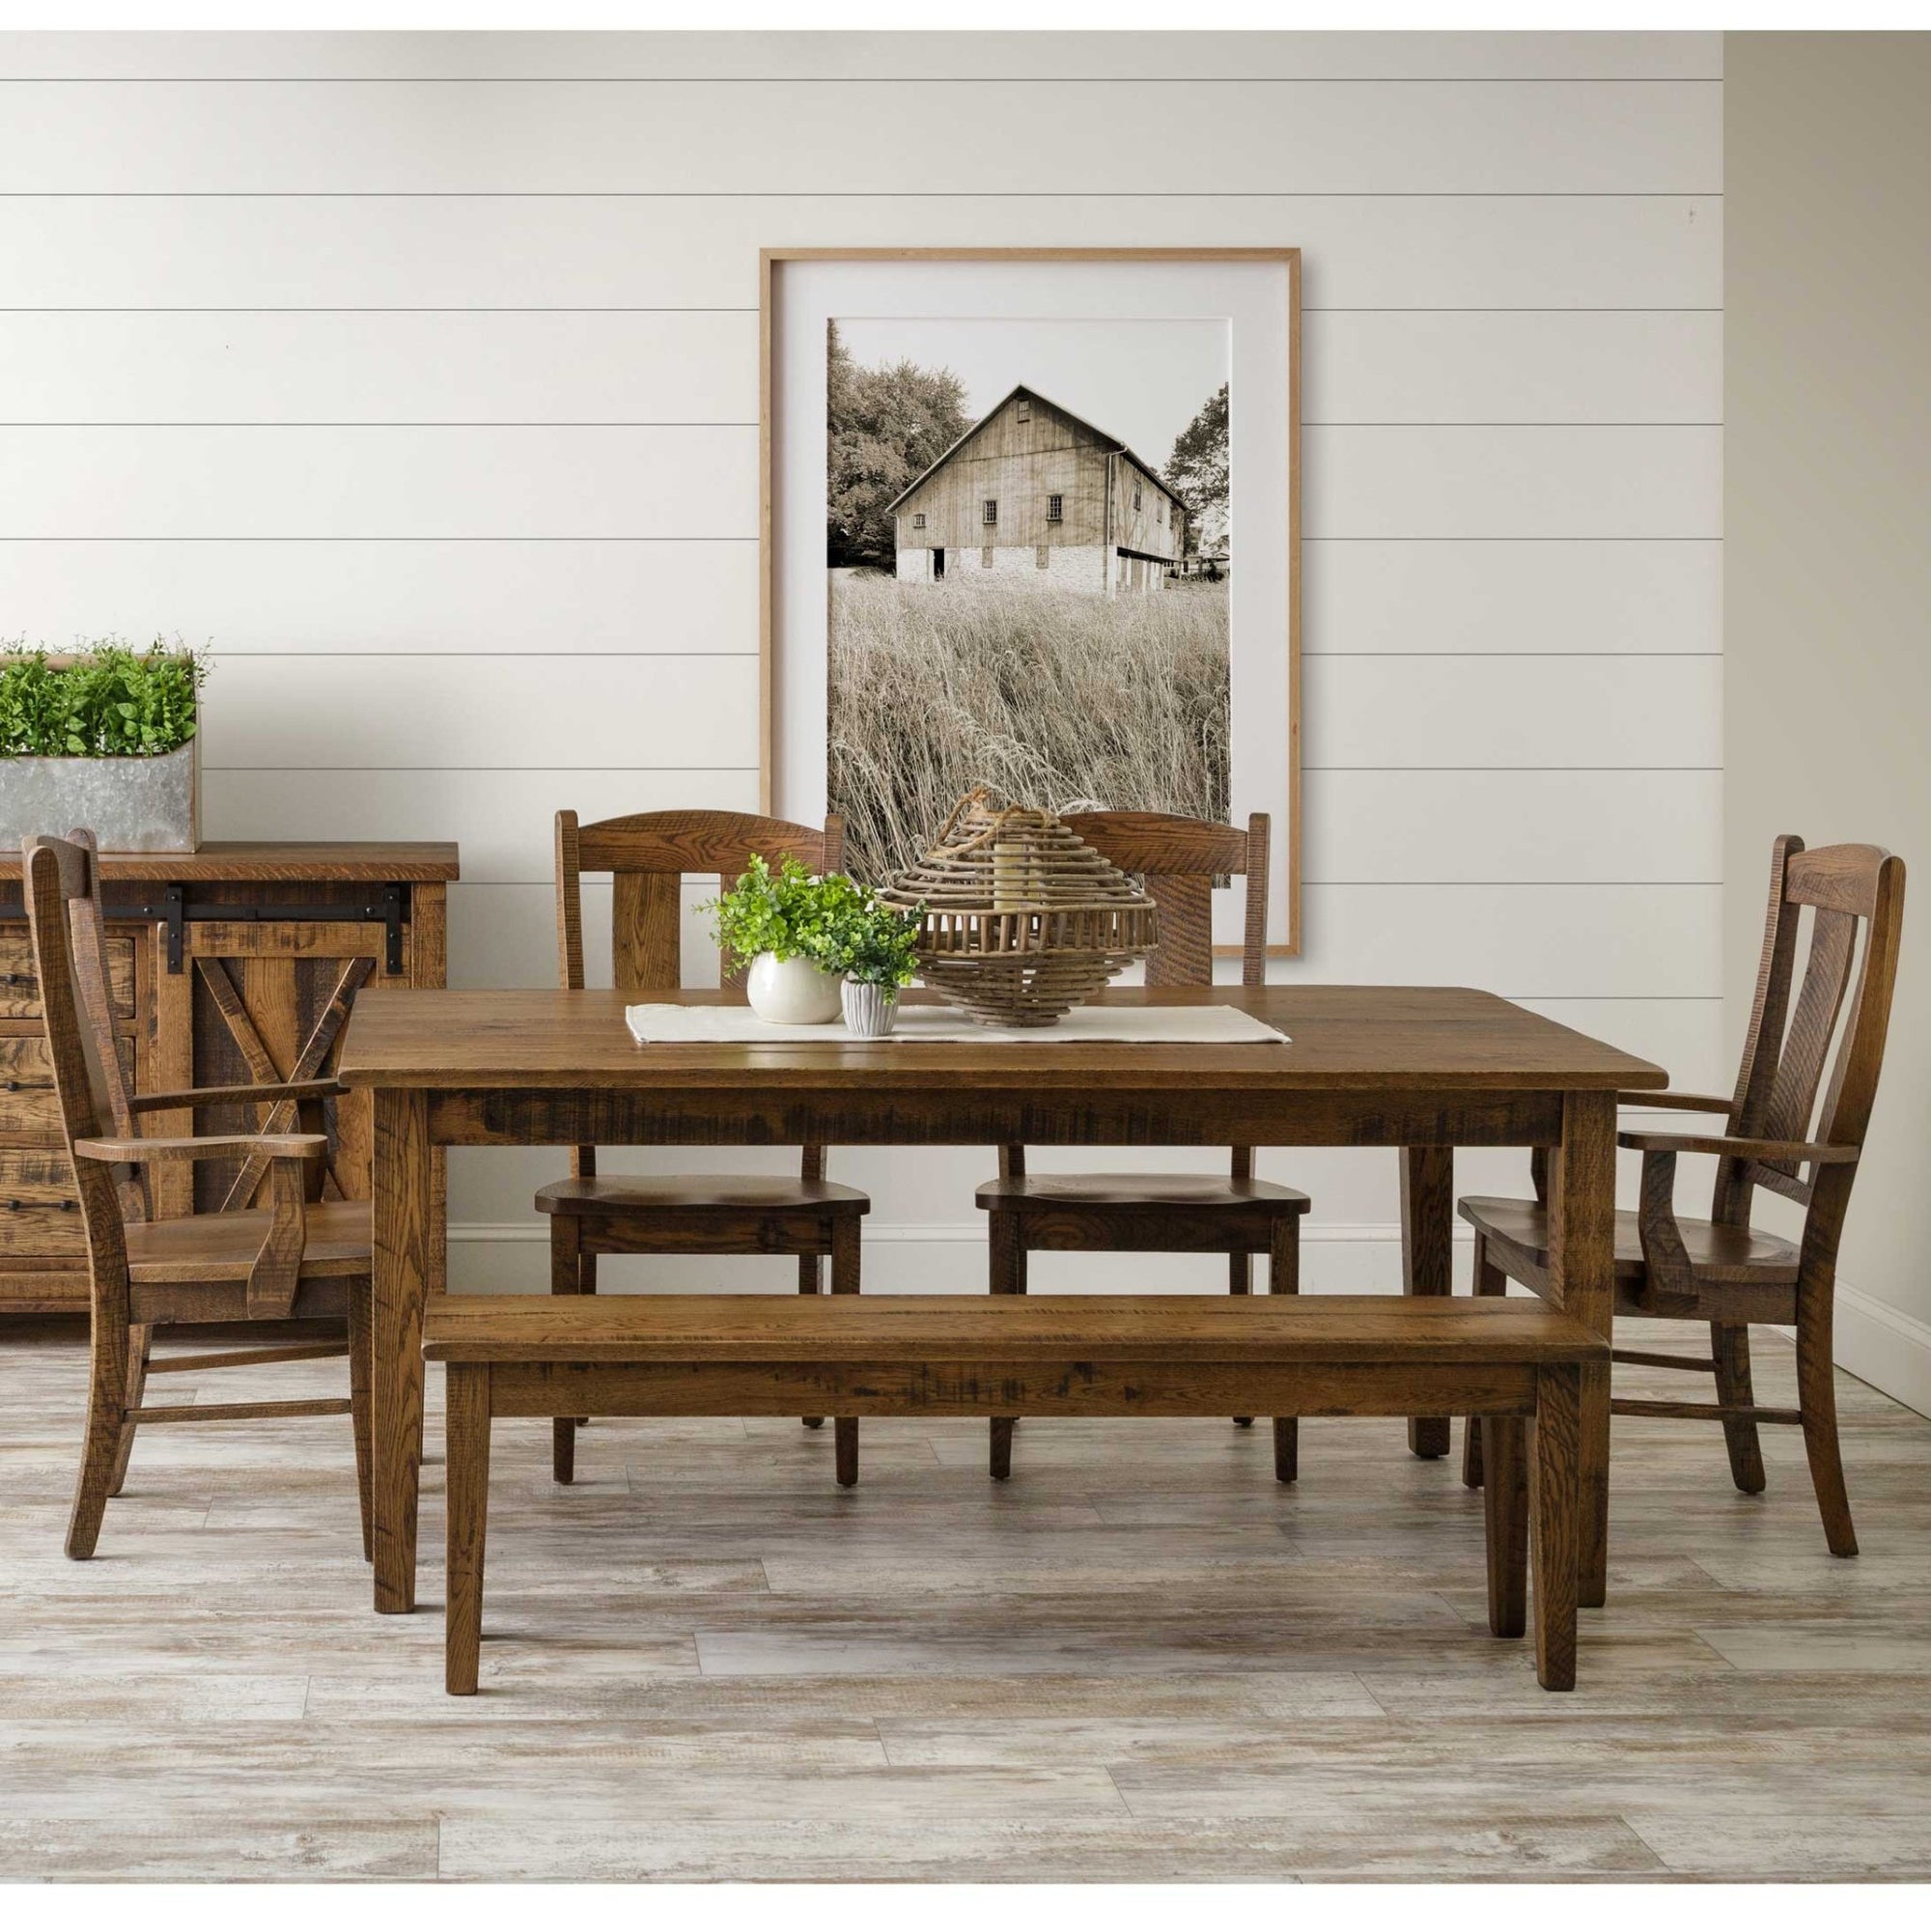 Amish 72" Rustic Shaker Leg Dining Set with 4 Chairs & Bench - snyders.furniture